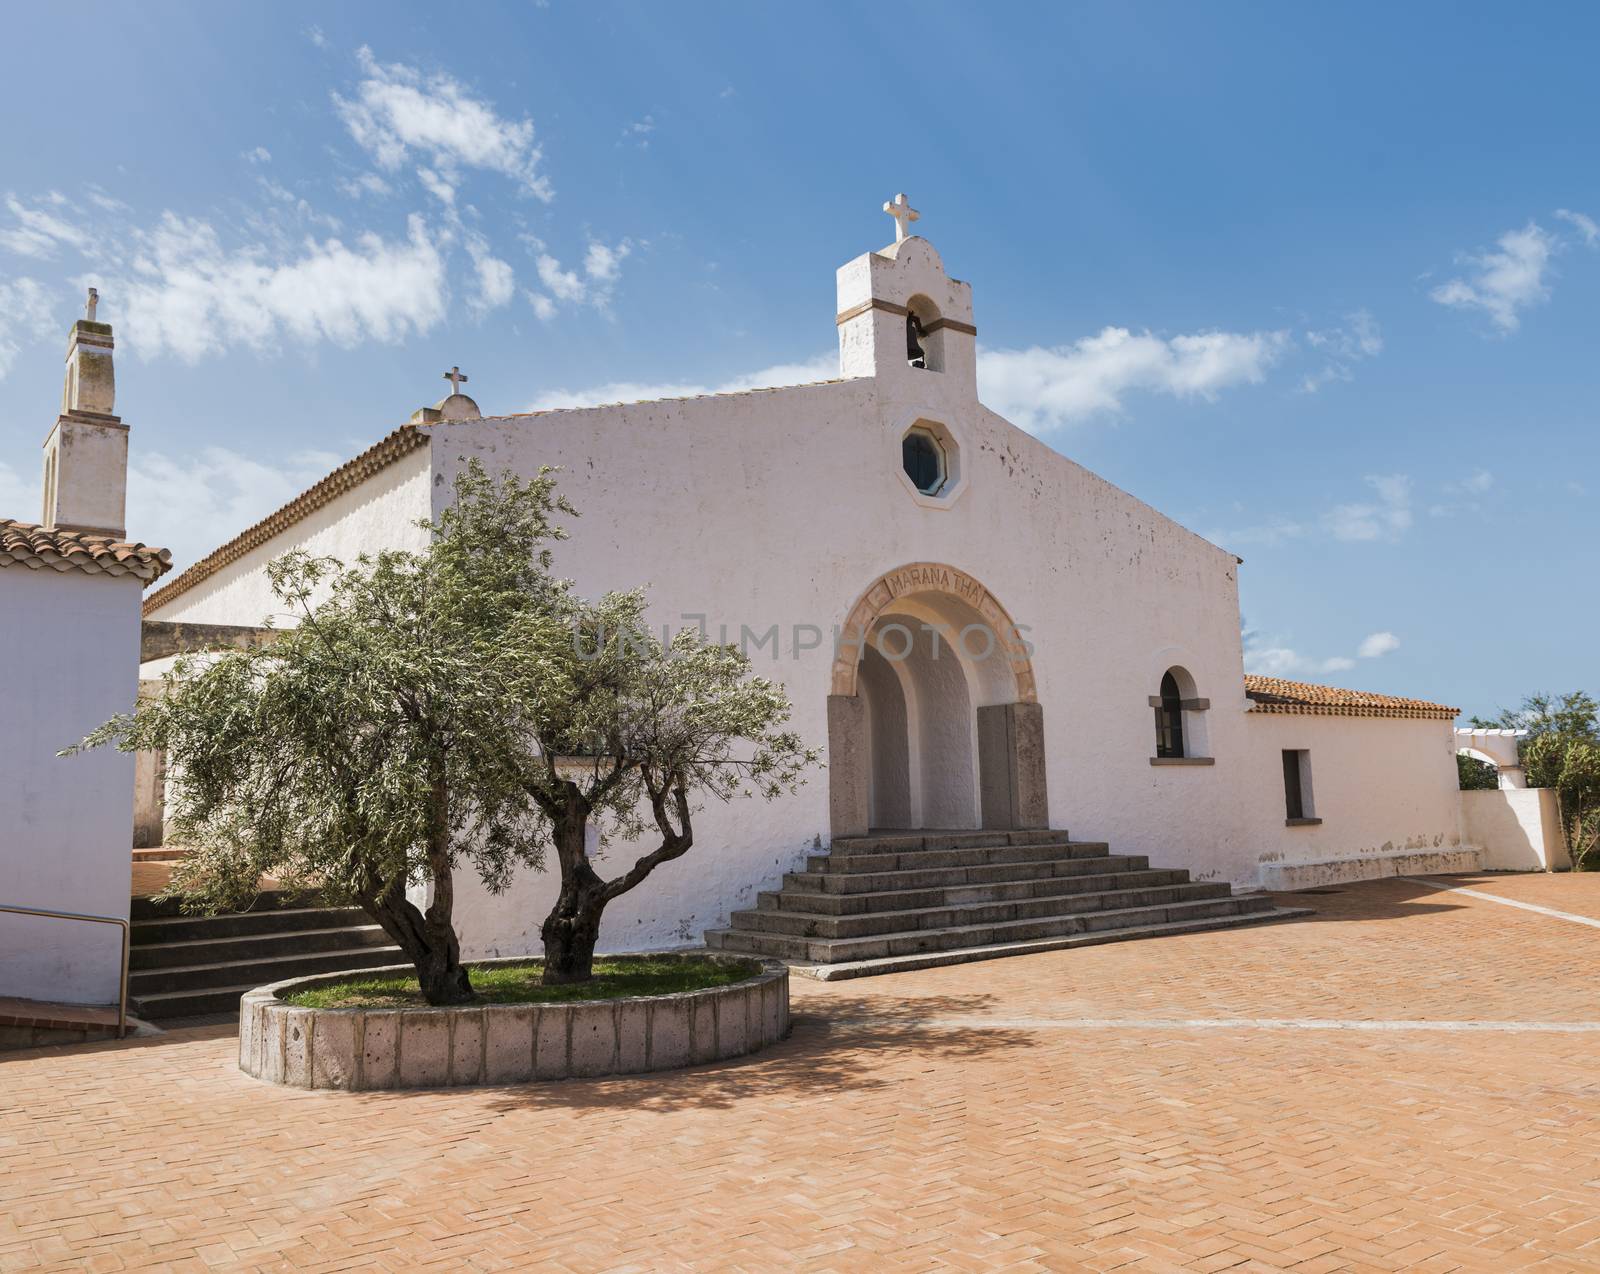 the church of marinella in sardinia by compuinfoto